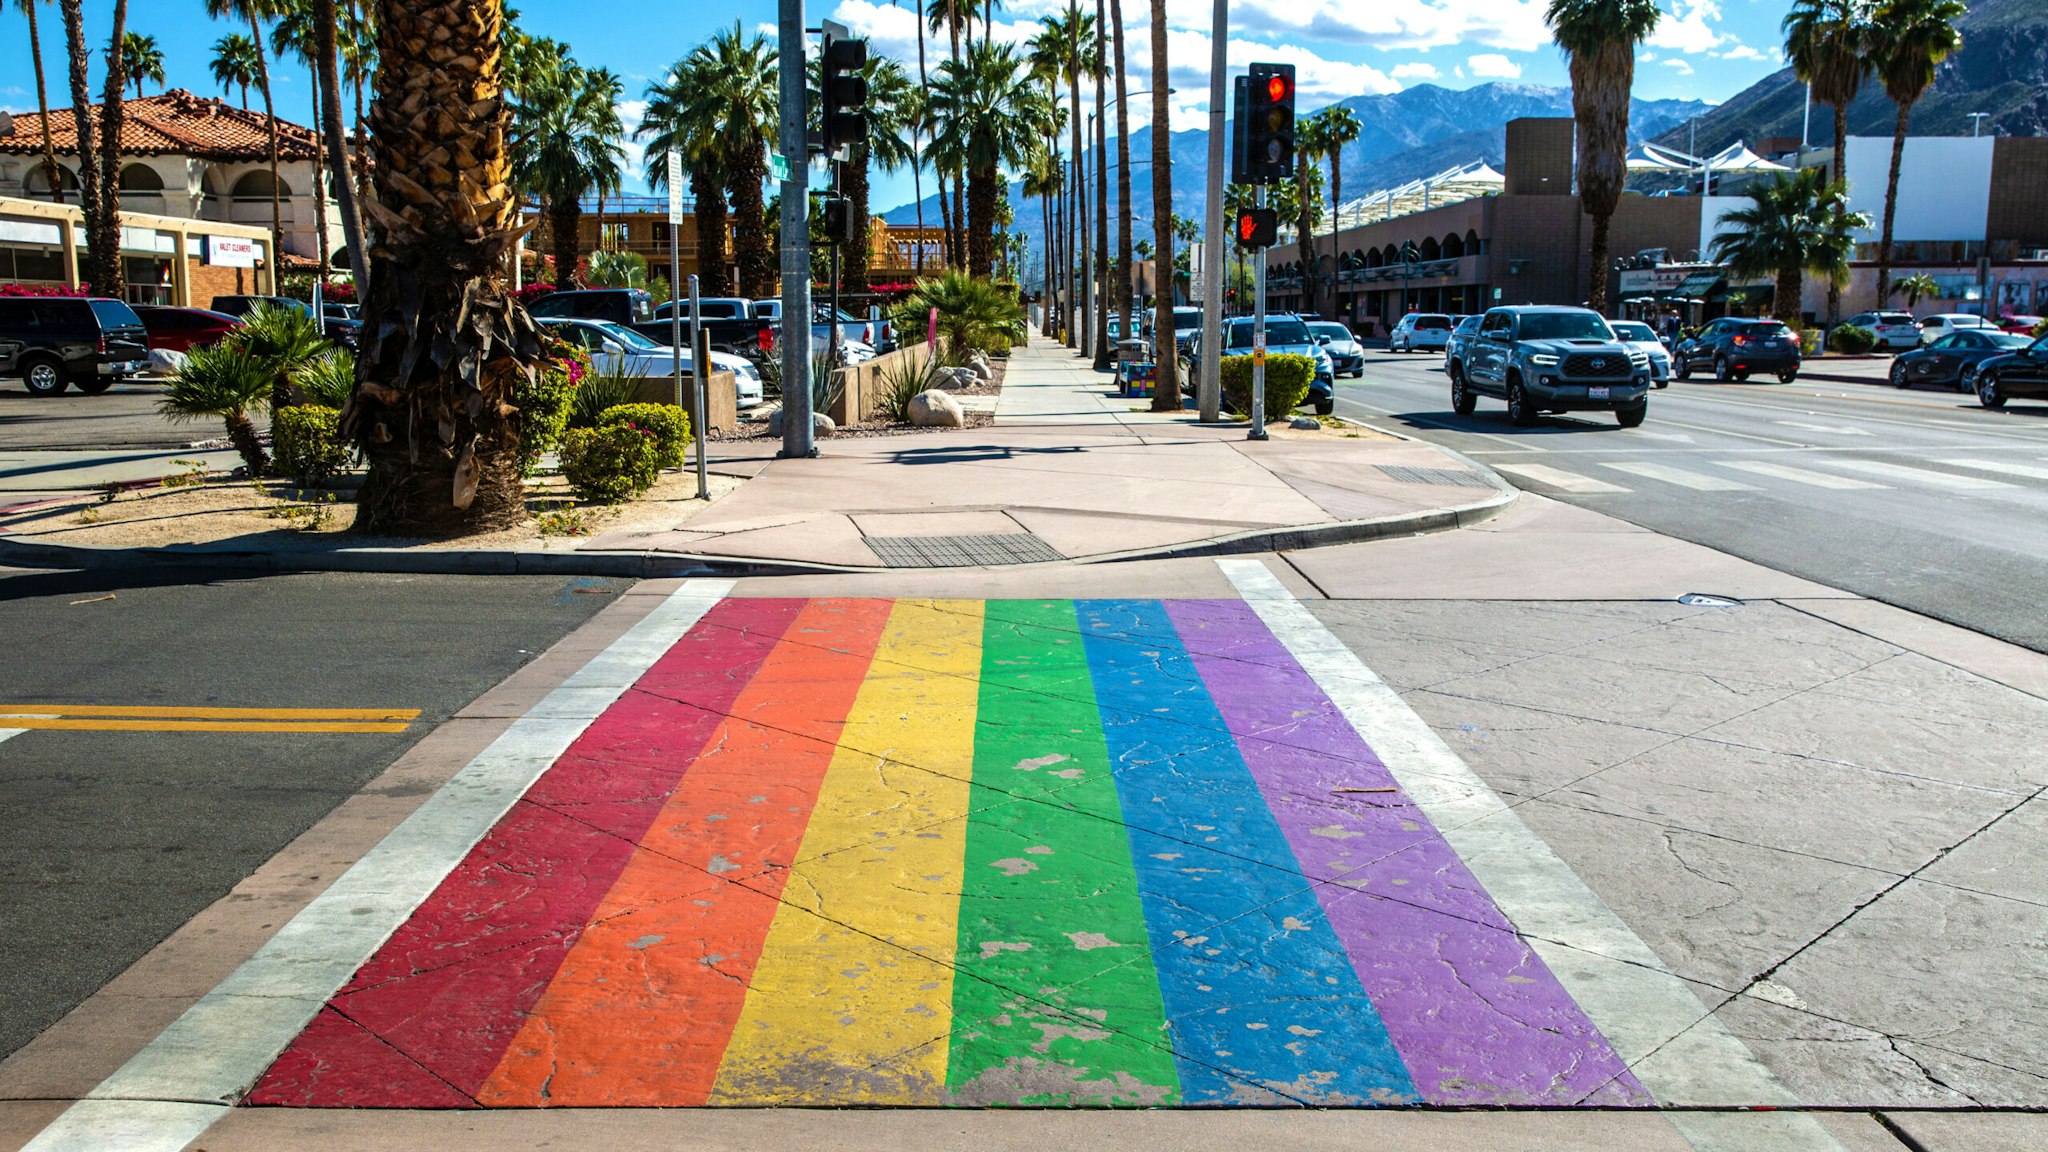 PALM SPRINGS, CA - MARCH 7: The street pedestrian crossing is painted in rainbow colors as viewed on March 7, 2022 in Palm Springs, California. Palm Springs is a city of nearly 50,000 that has become an important tourist destination for the LGBTQ community as well as a relaxed environment for older retirees. This desert resort city is located 2 hours east of Los Angeles in Riverside County within the Colorado Desert's Coachella Valley.